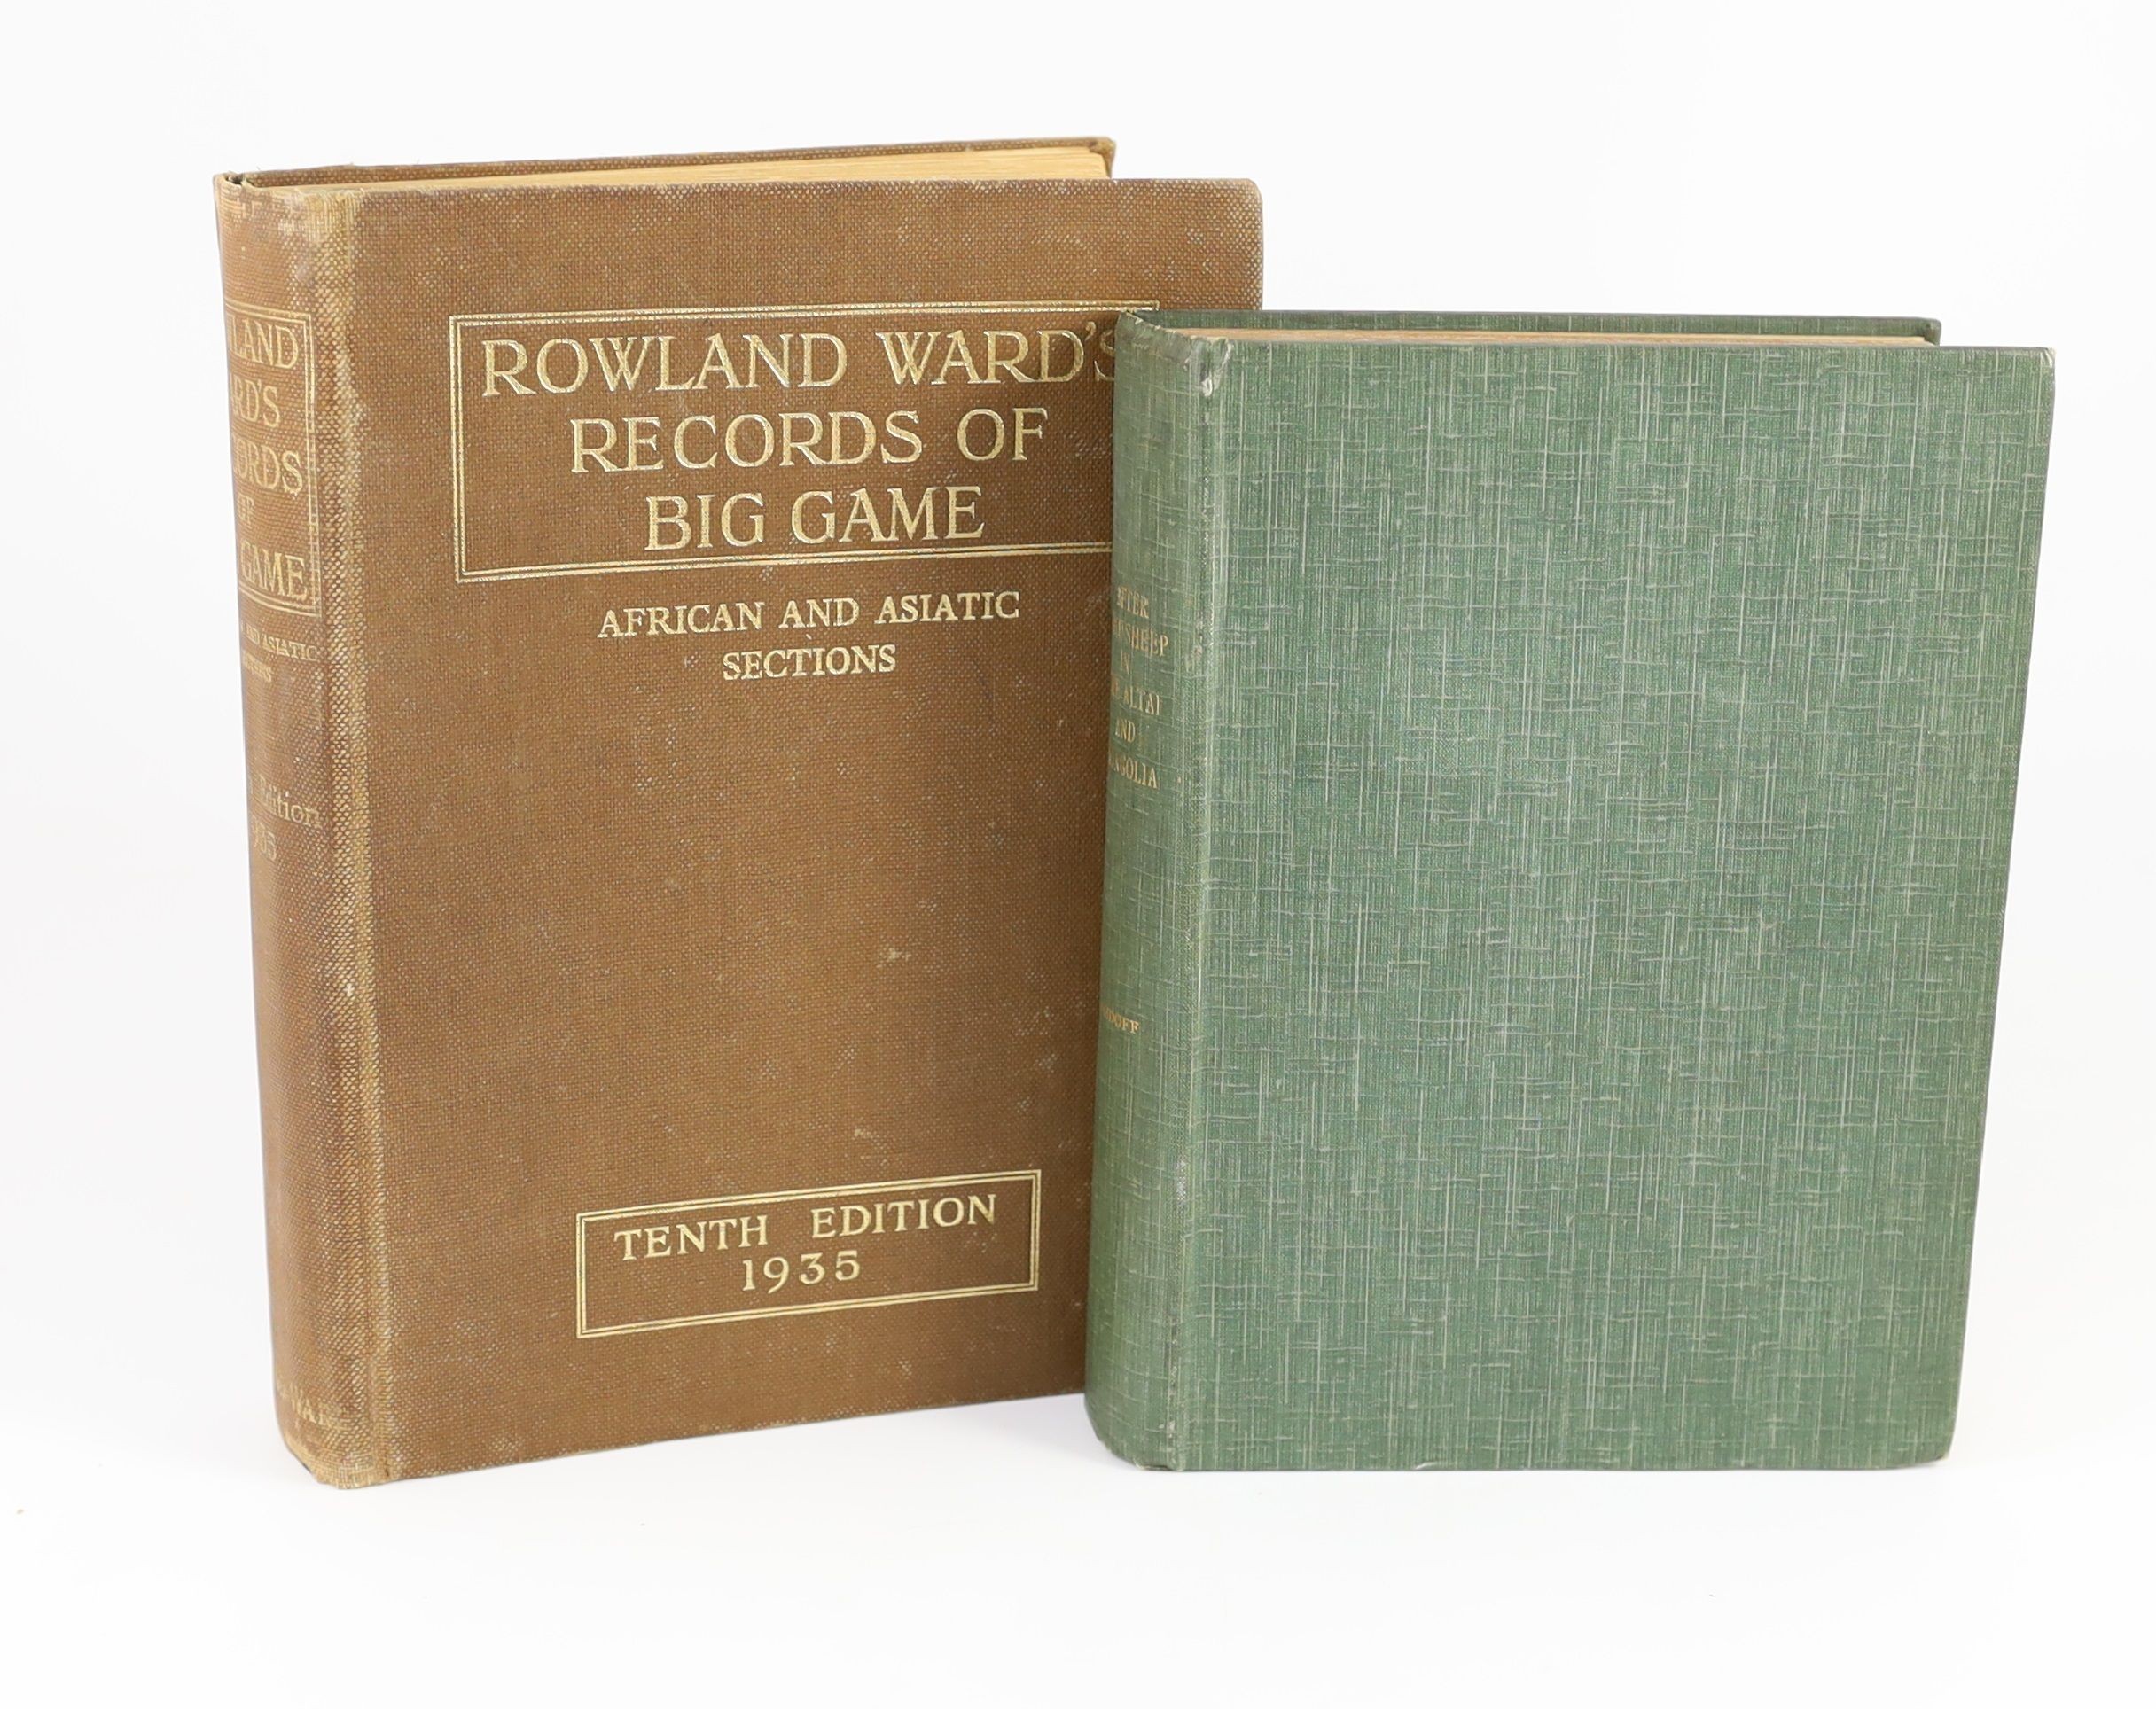 Demidoff, E. After Wild Sheep in the Altai and Mongolia. With 82 a Coloured Frontispiece and a Map. Roland Ward, London, 1900. Folding map bound at the back. Remainder(?) cloth binding, slightly warped. Together with, Wa